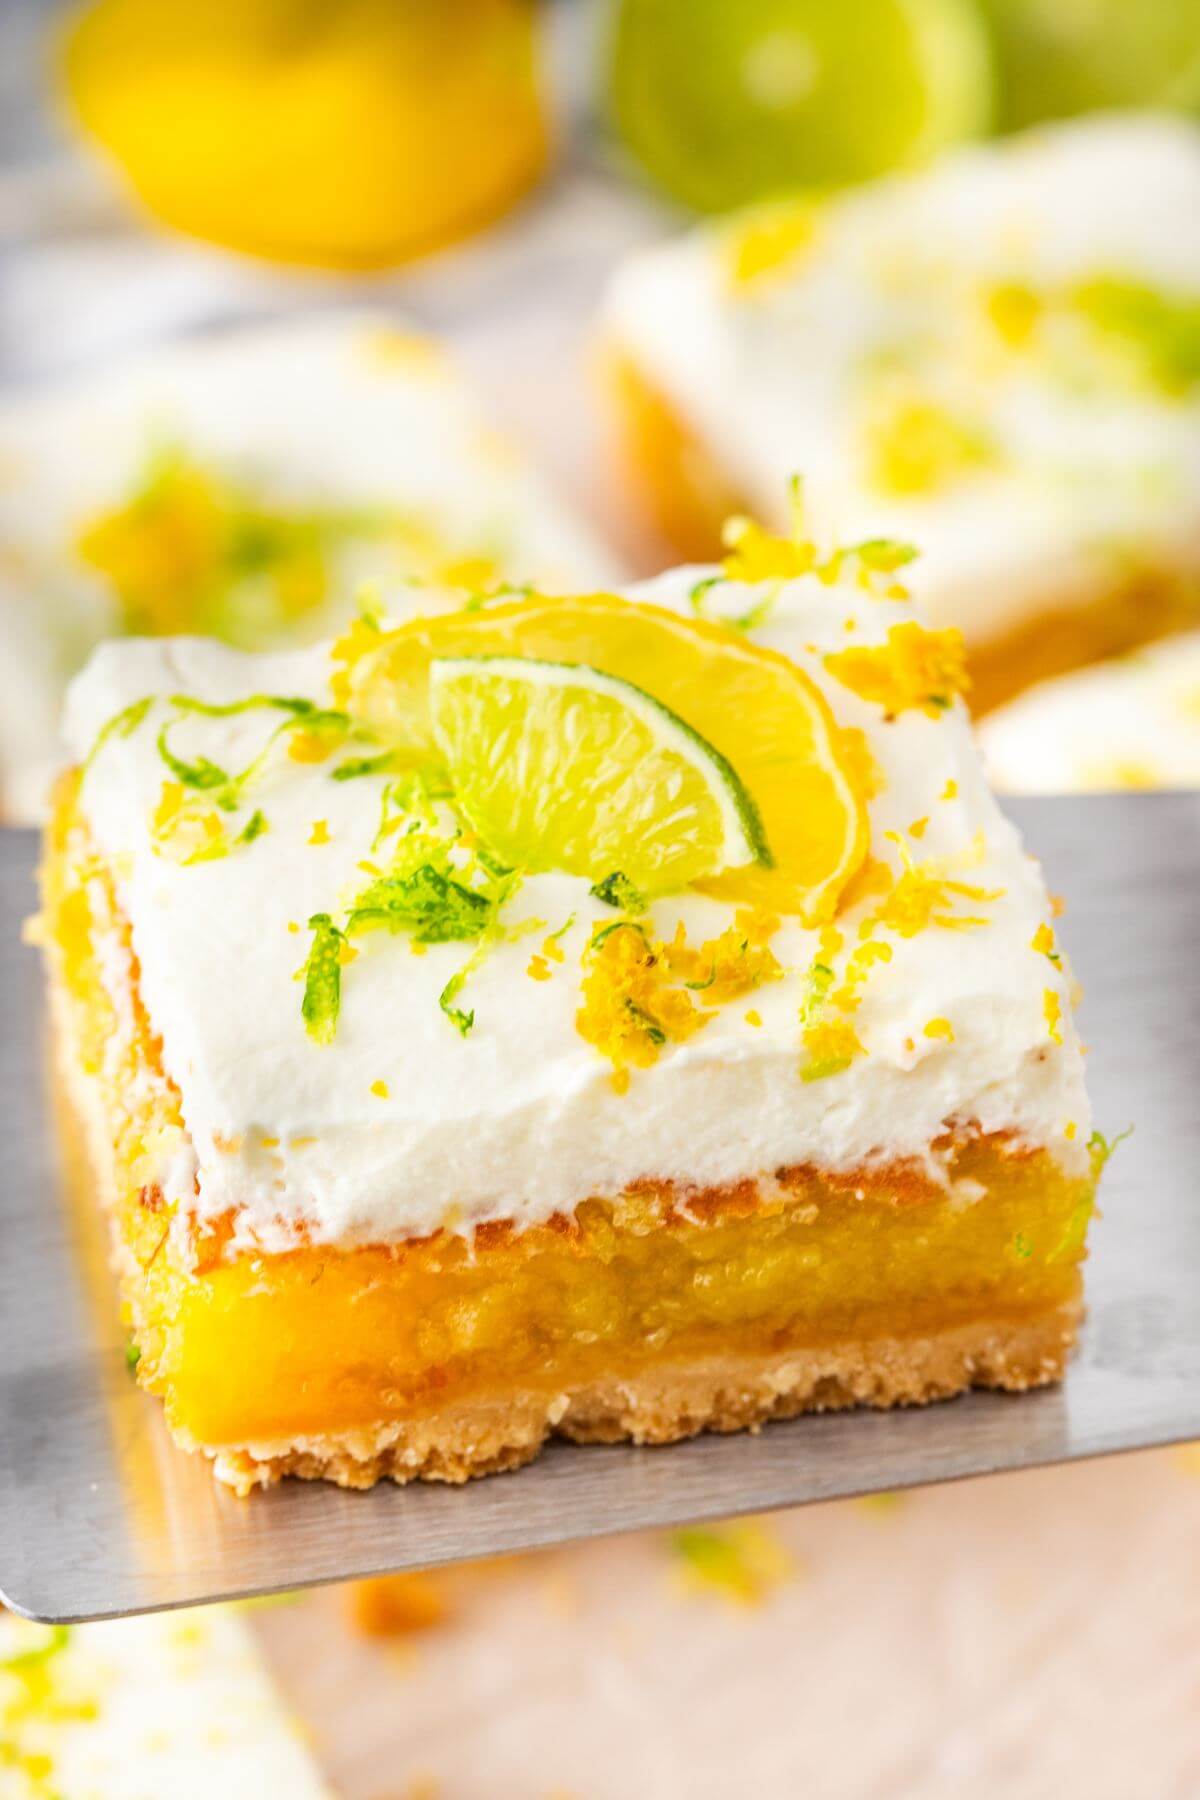 Lime and lemon slices and zest top a yellow and white dessert bar.